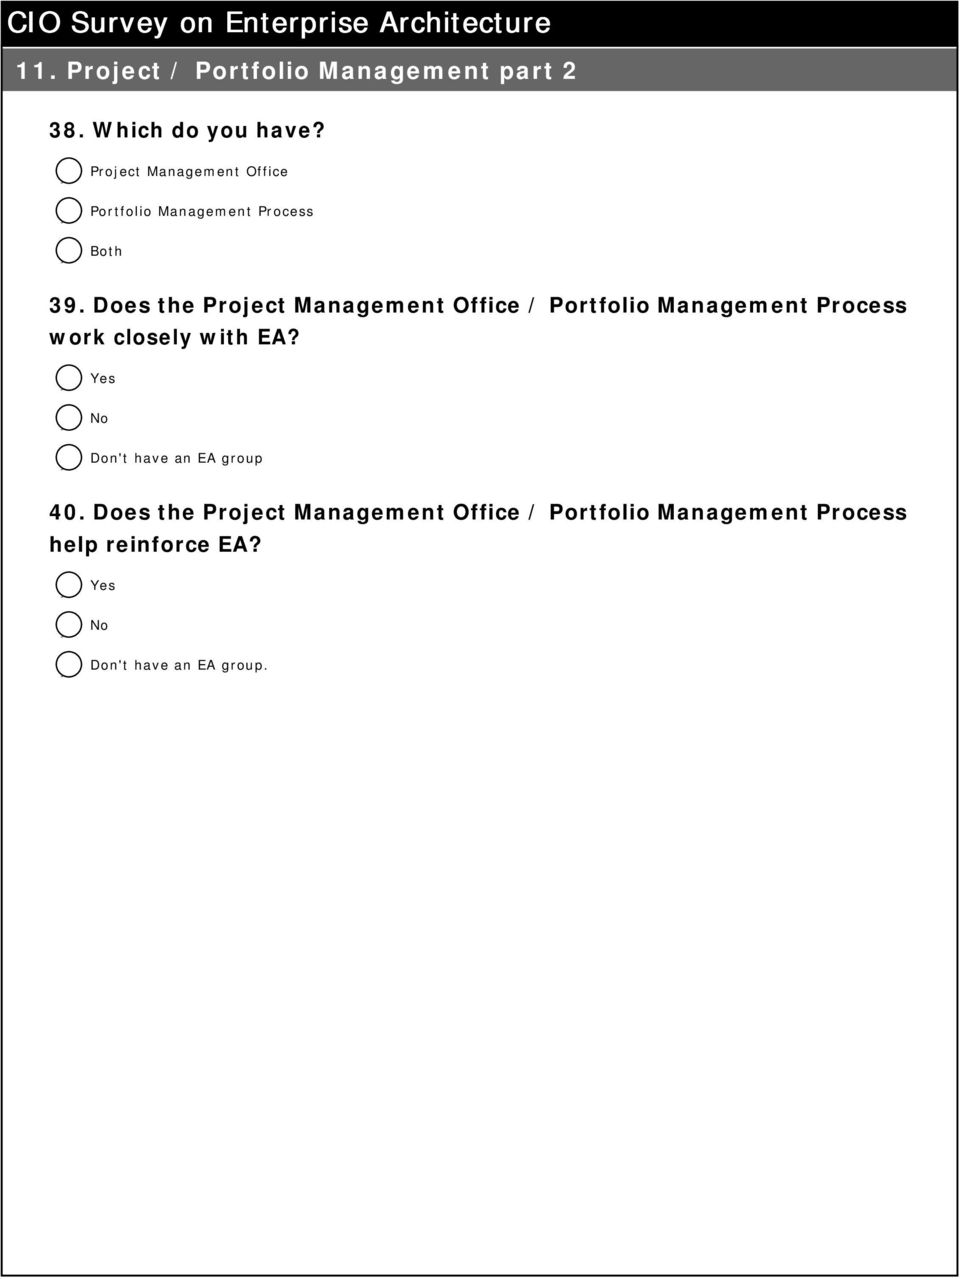 Does the Project Management Office / Portfolio Management Process work closely with EA?